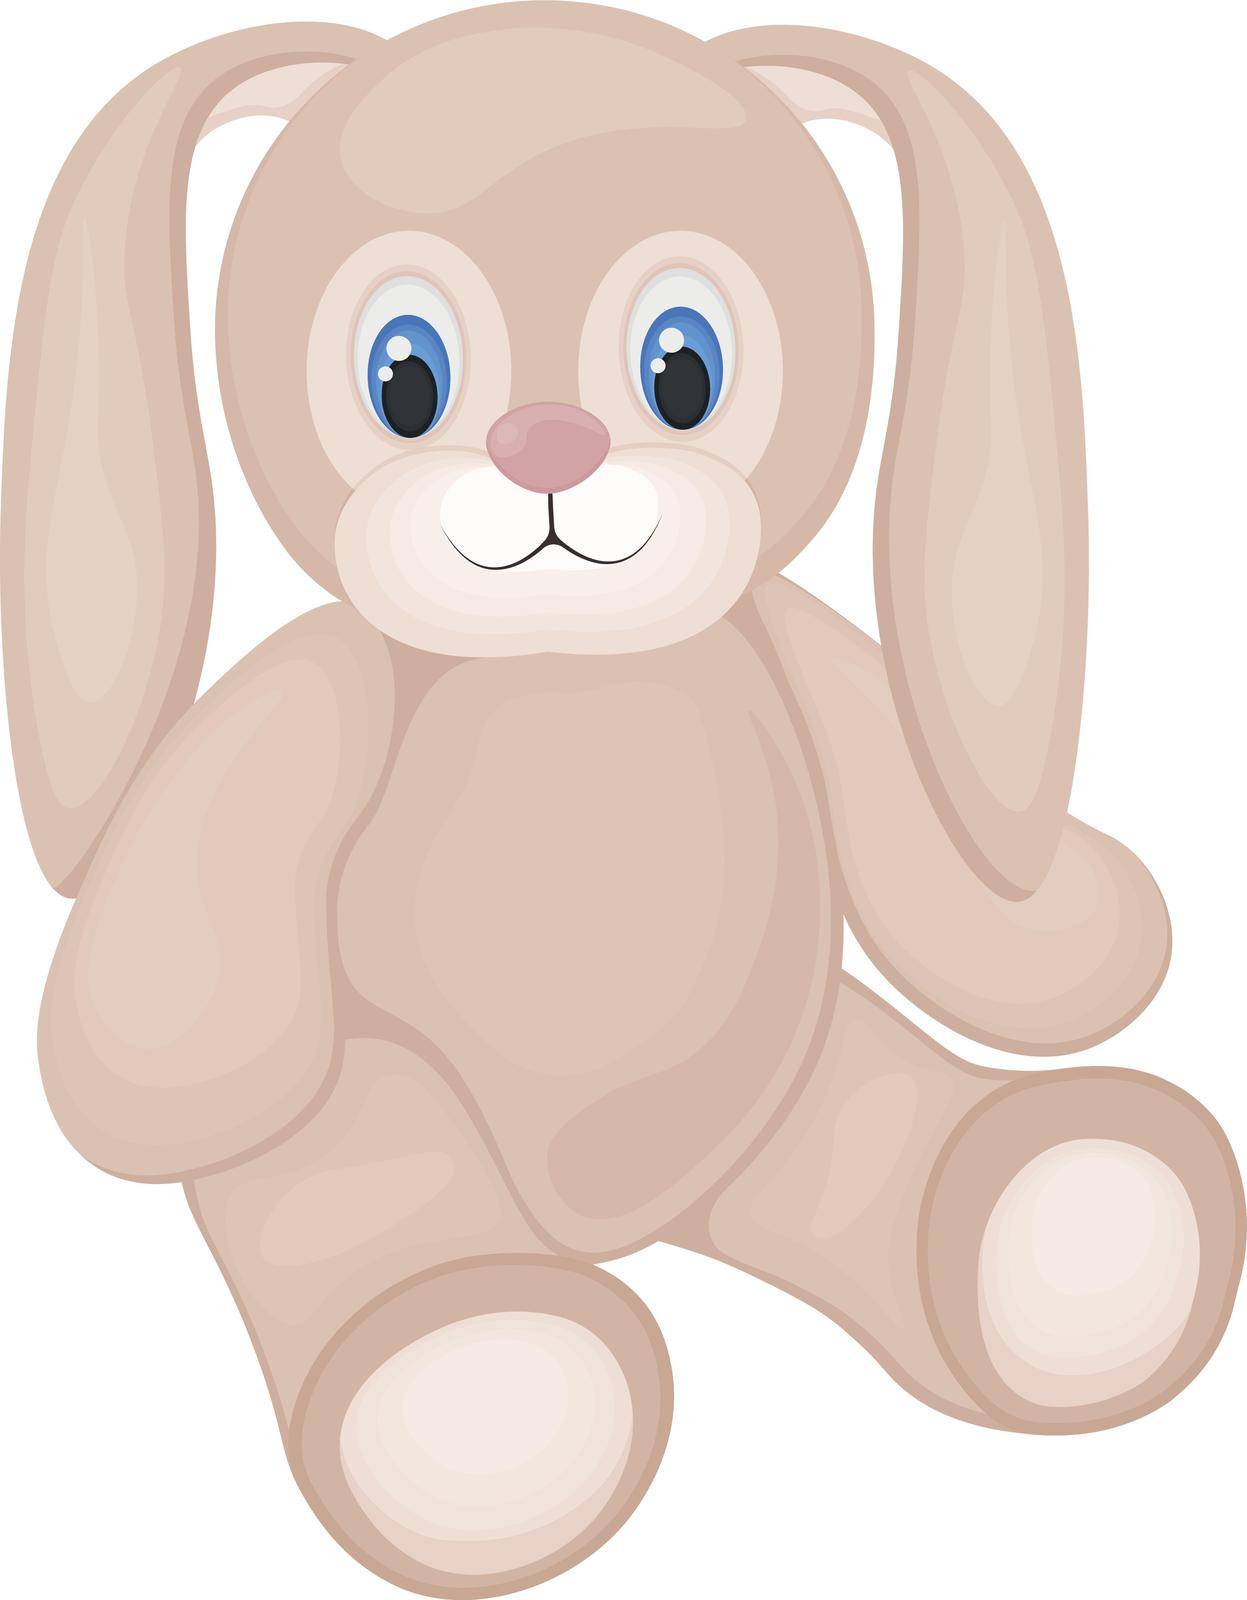 Cute bunny toy. A smiling stuffed rabbit is sitting on the floor. A stuffed rabbit. Vector illustration isolated on a white background by NastyaN